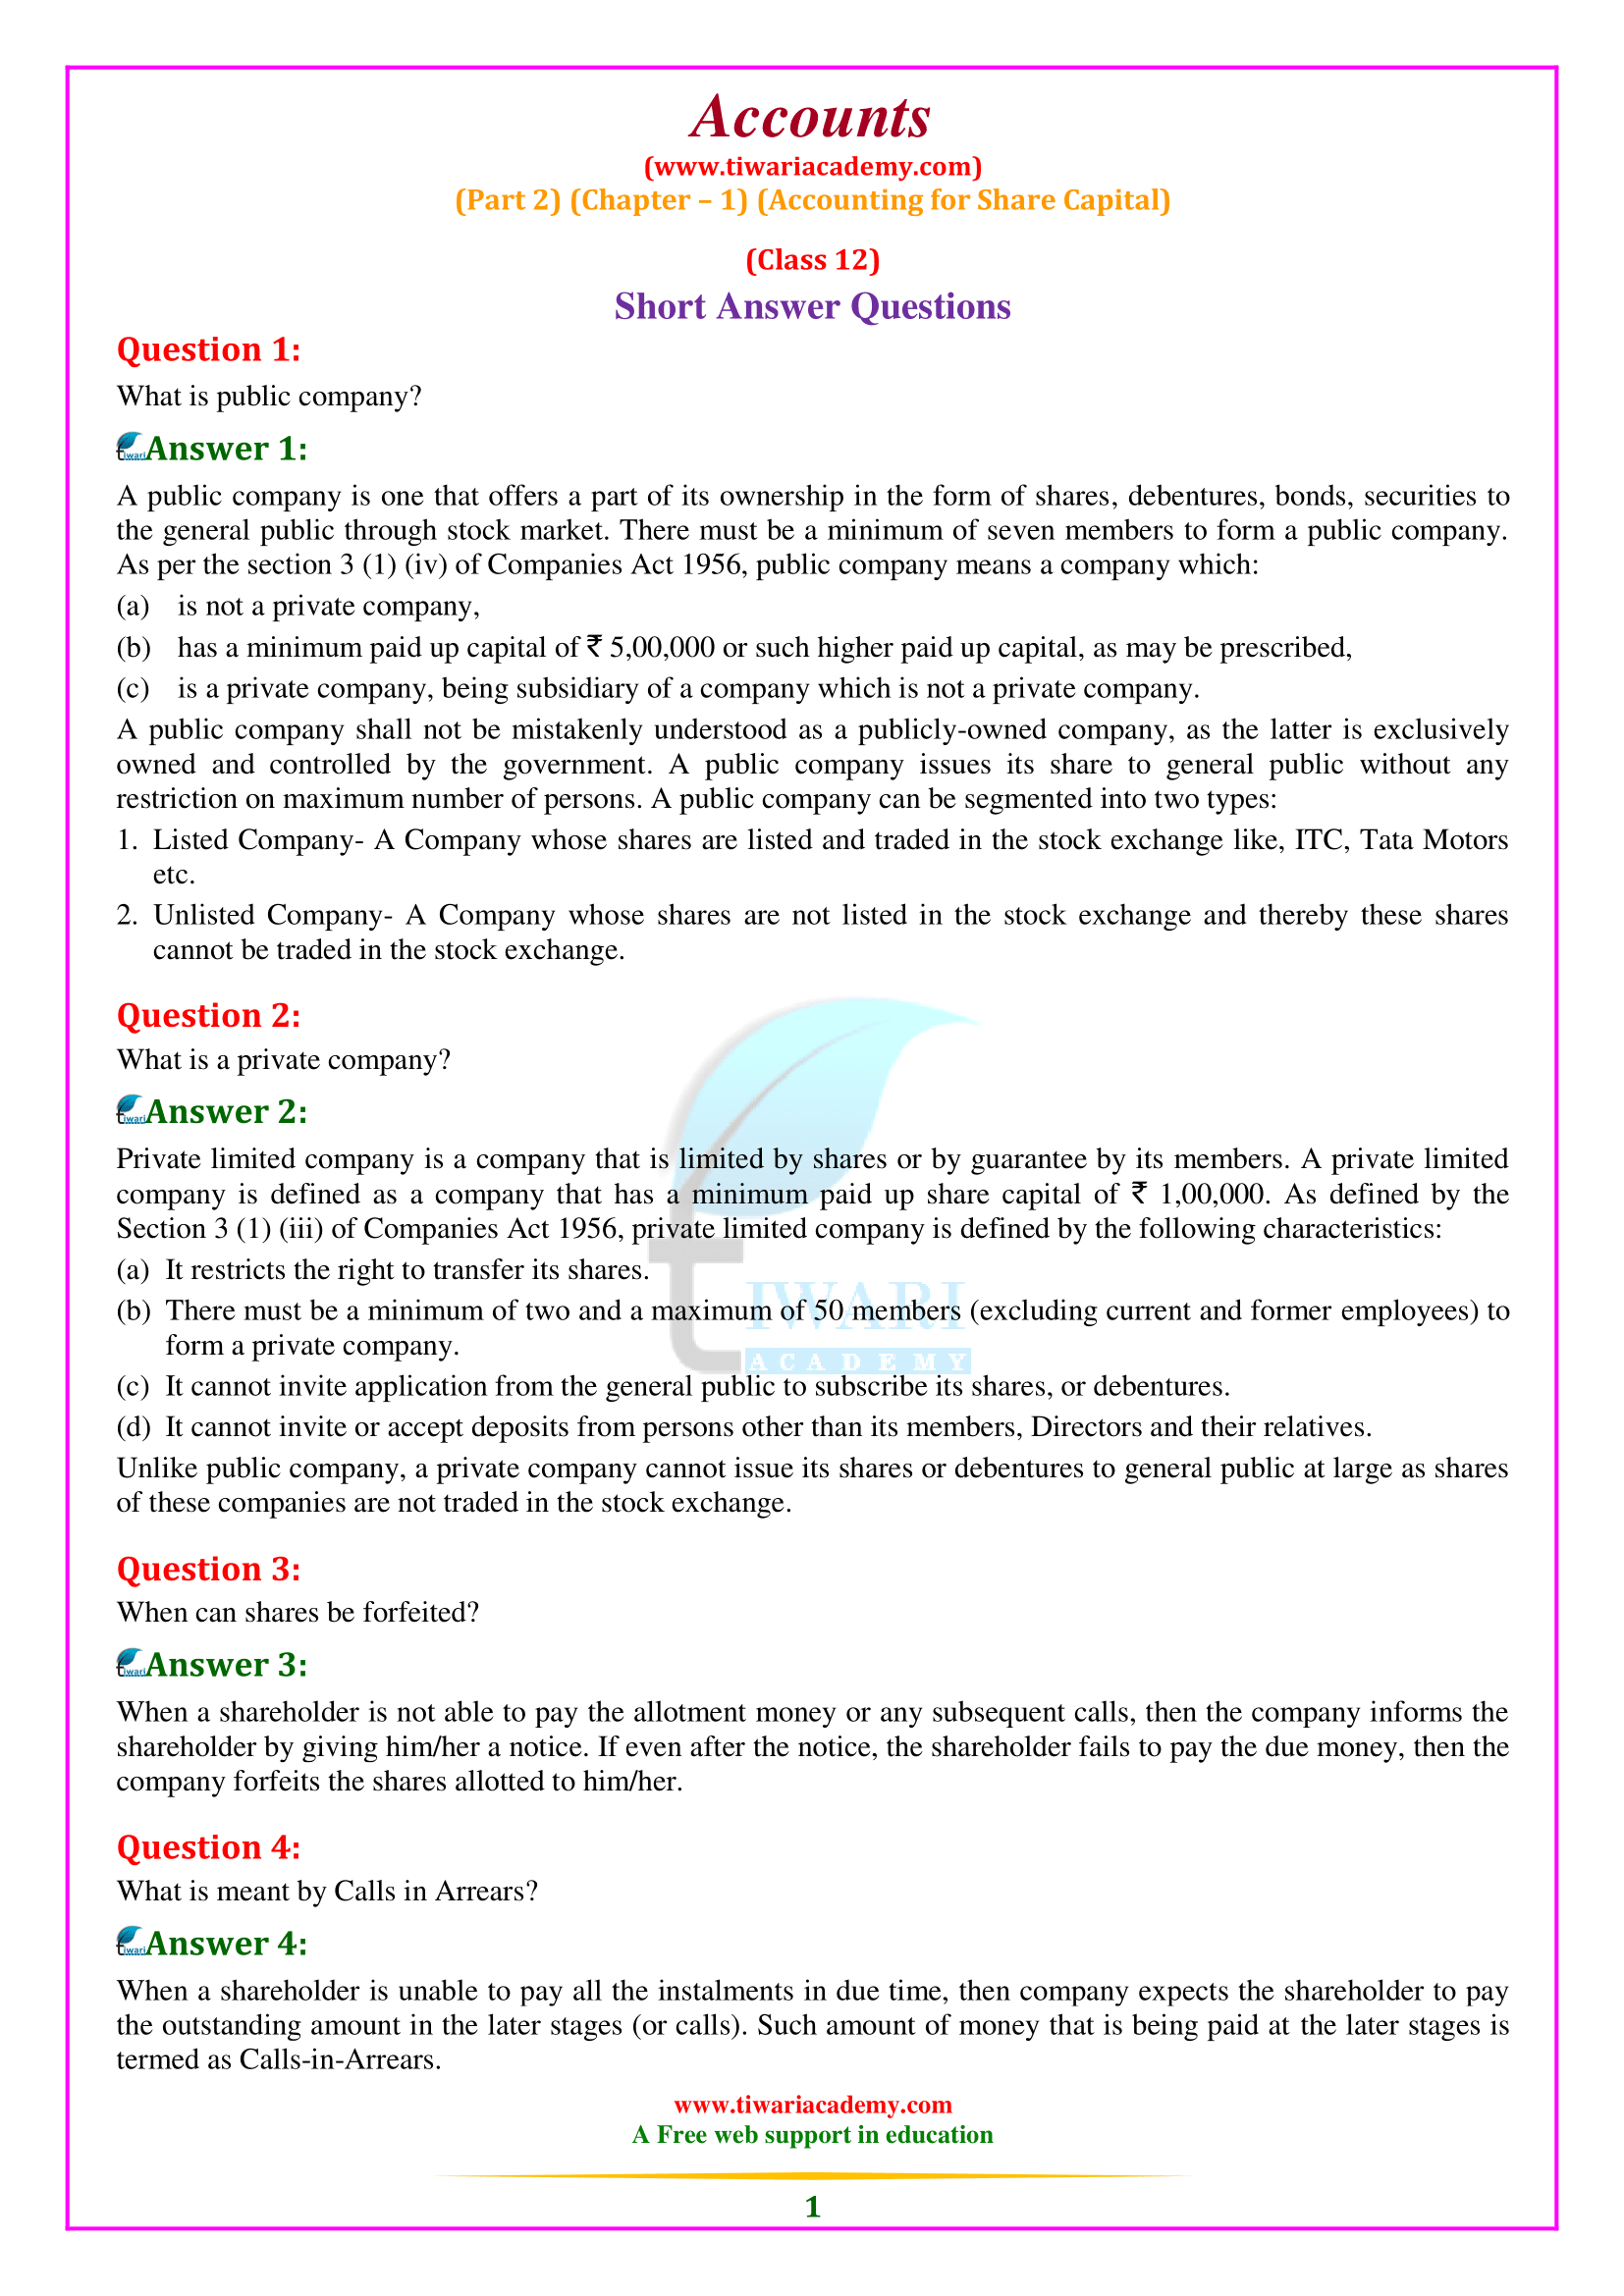 NCERT Solutions for Class 12 Accountancy Part 2 Chapter 1 Accounting for Share Capital.